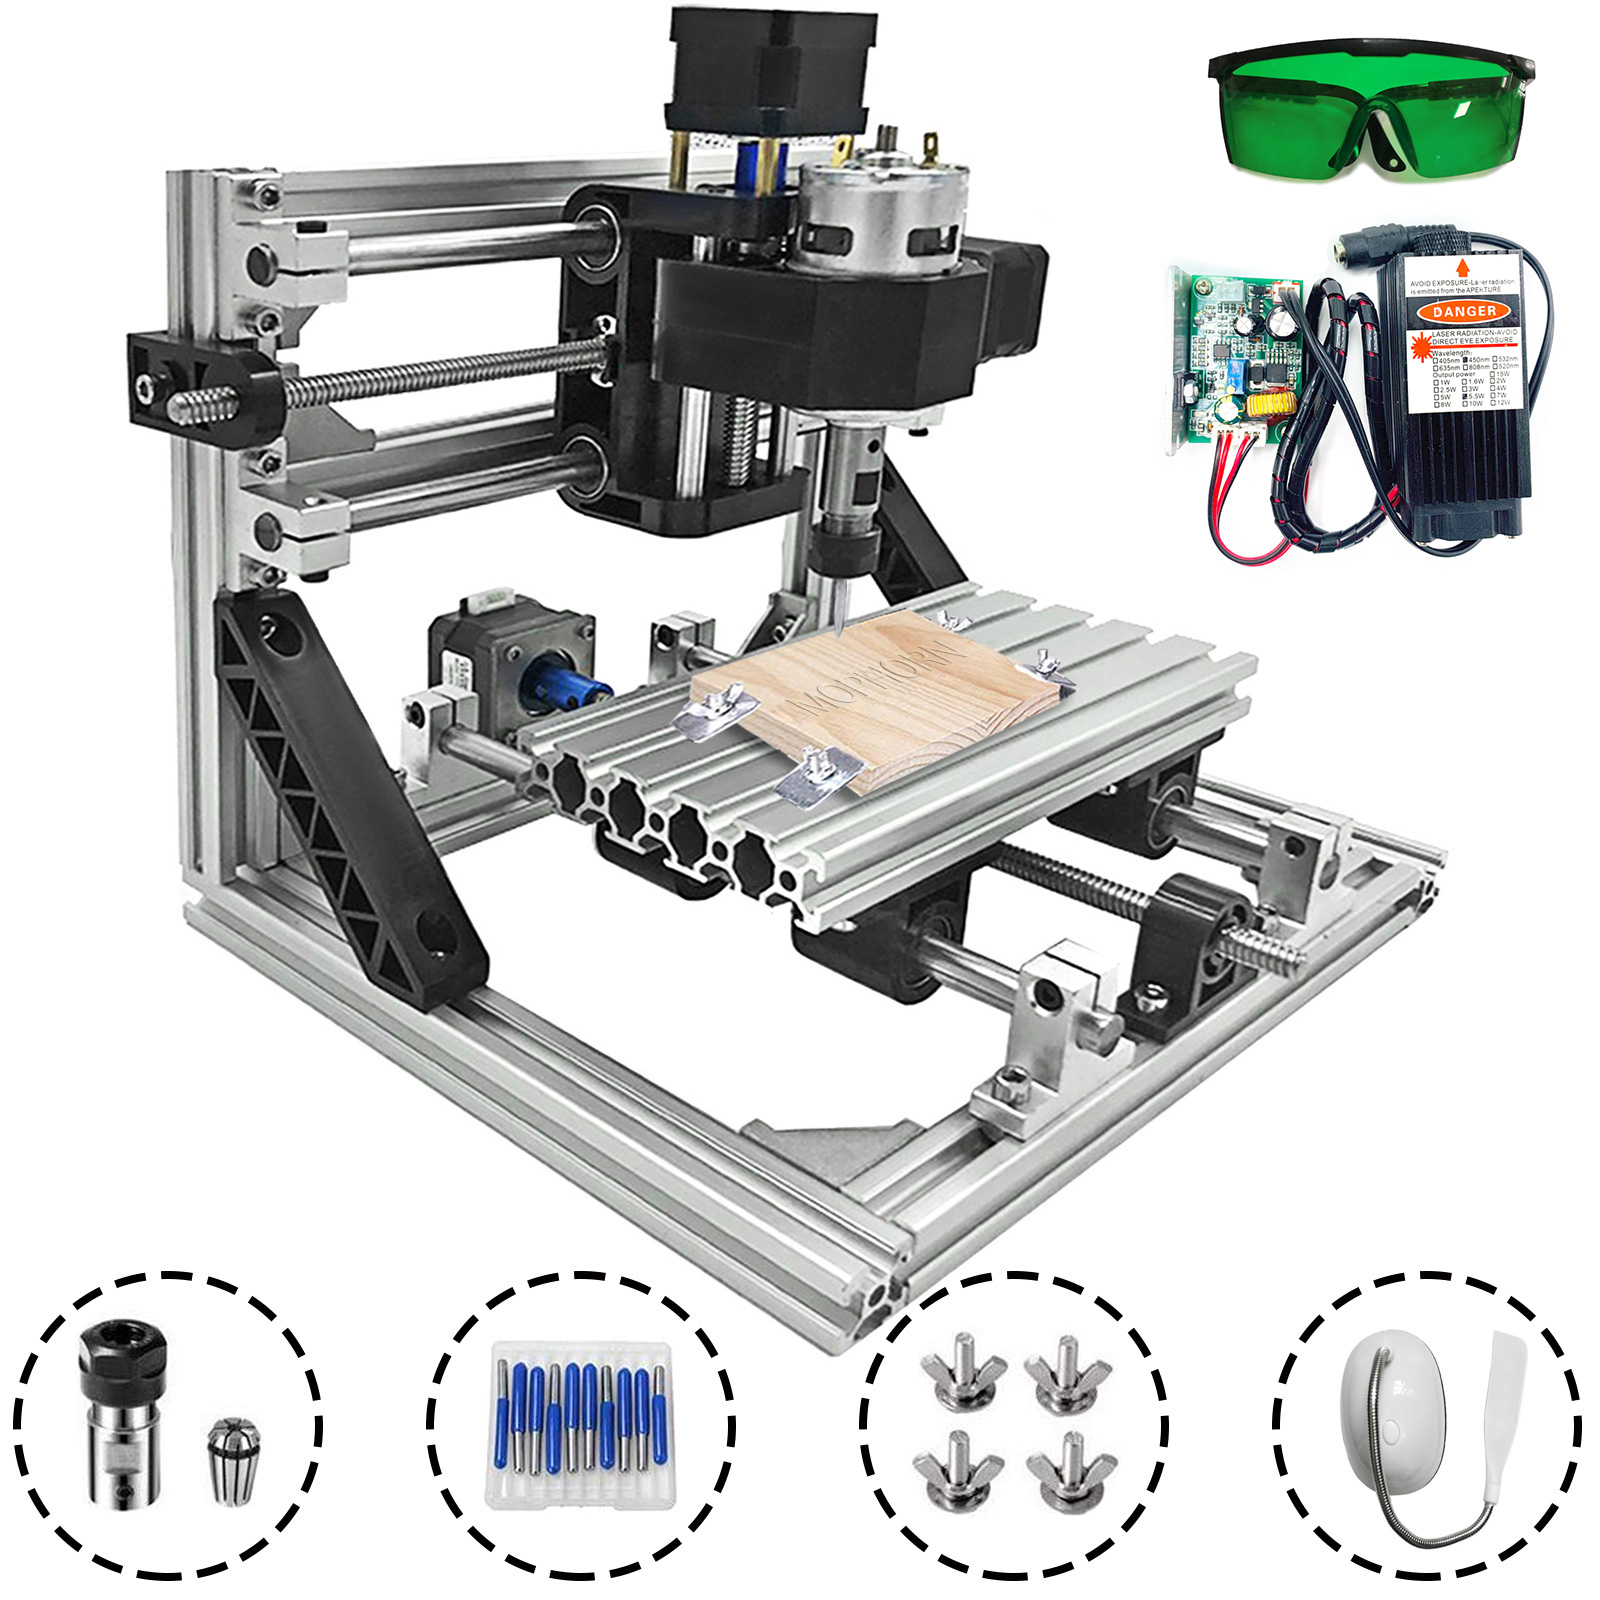 3 Axis CNC Router Kit 2418 500MW TTL T8 Screw Machine With Laser Engraver DIY 